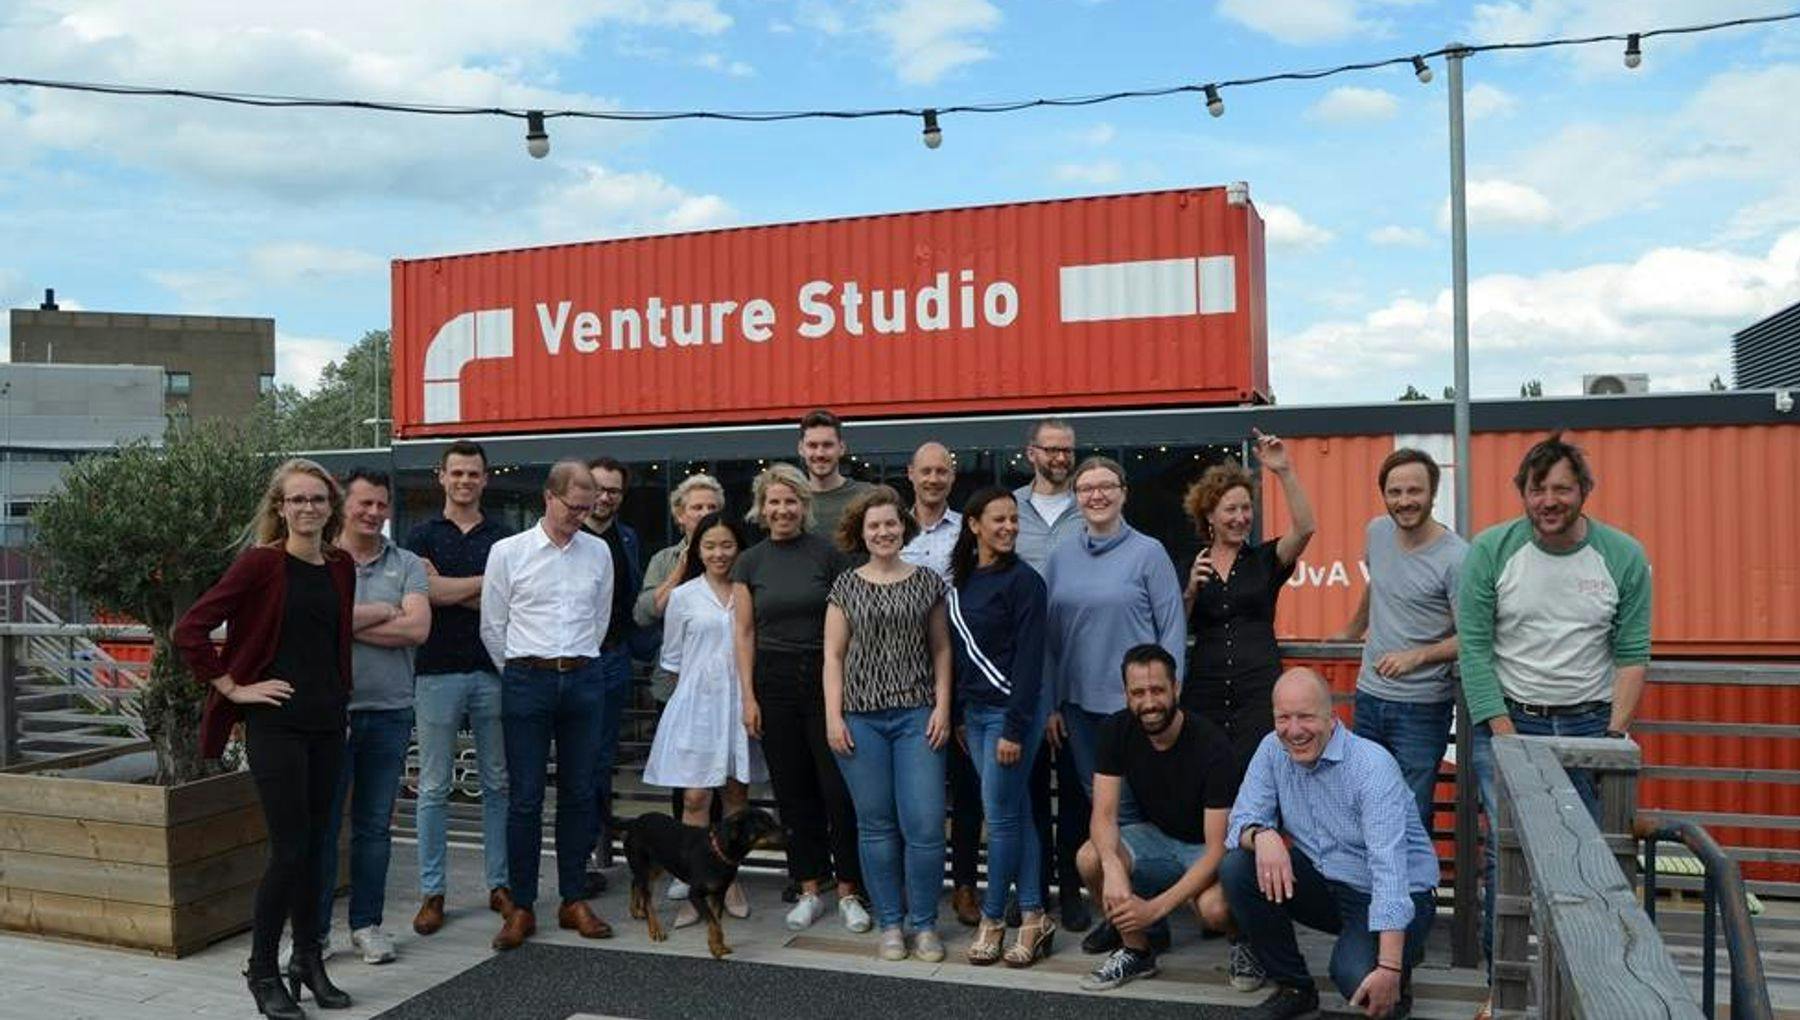 Group photo of Readytoscale standing outside Venture Studio